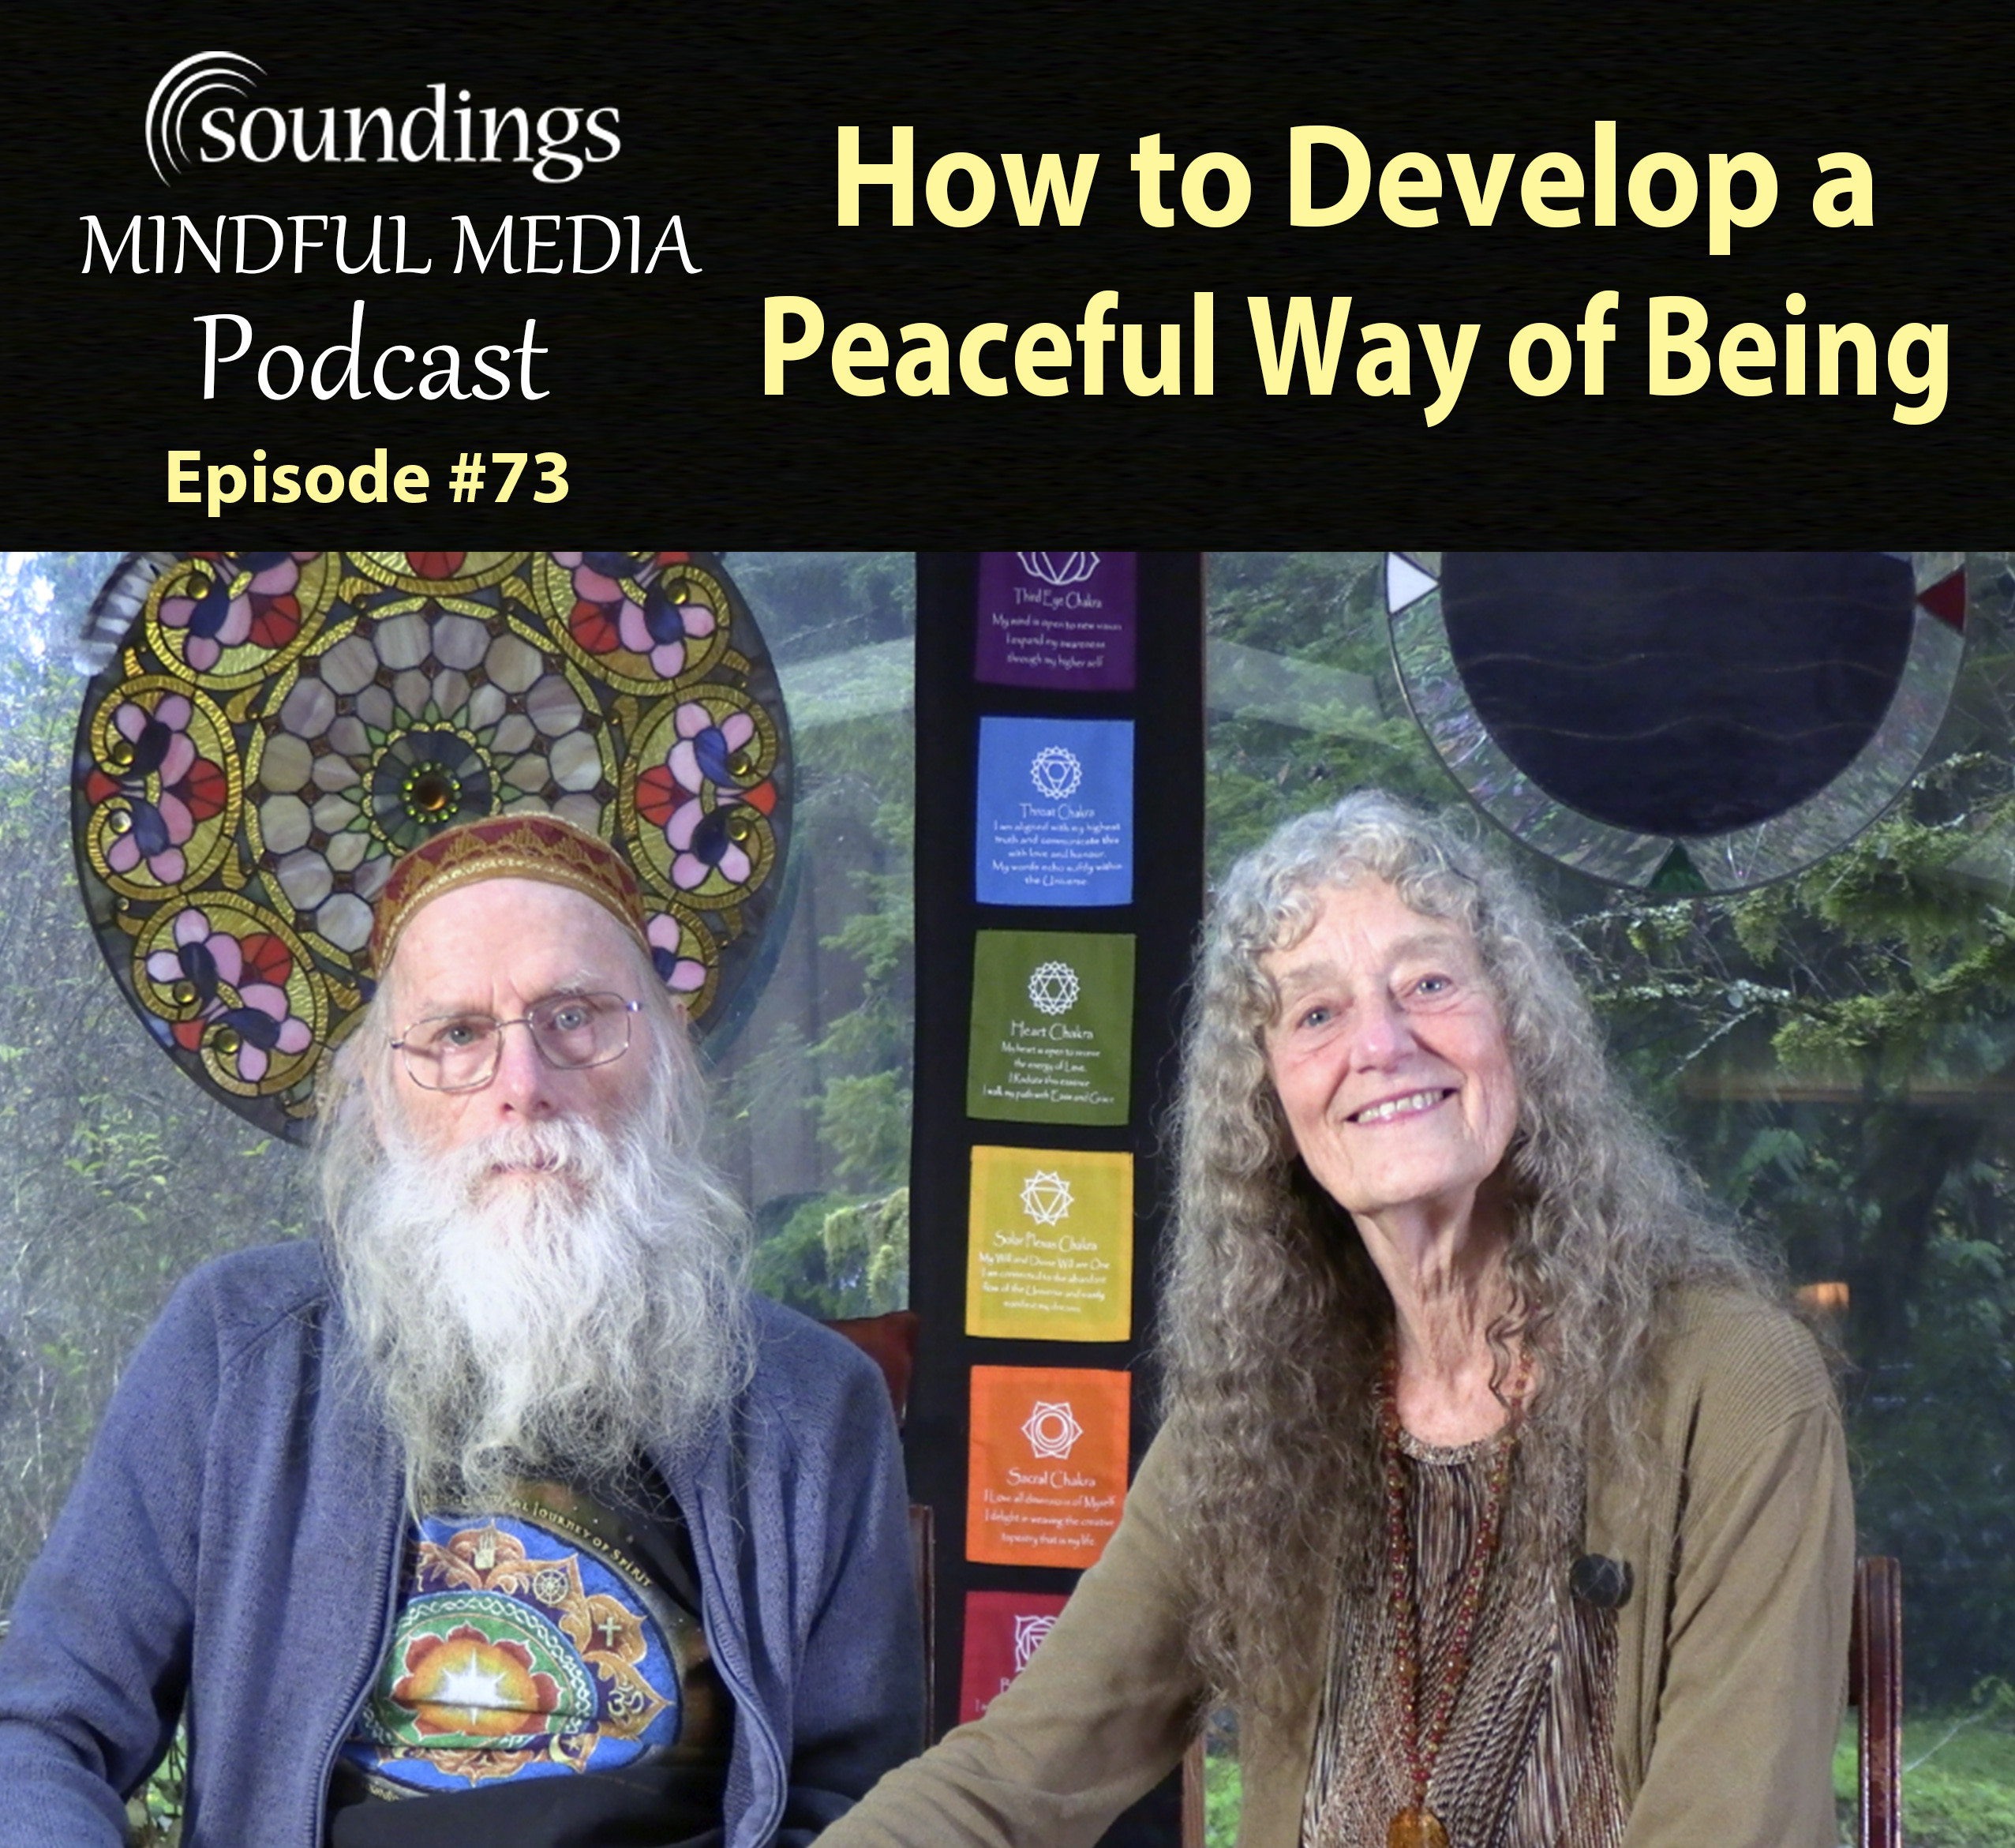 How to Develop a Peaceful Way of Being